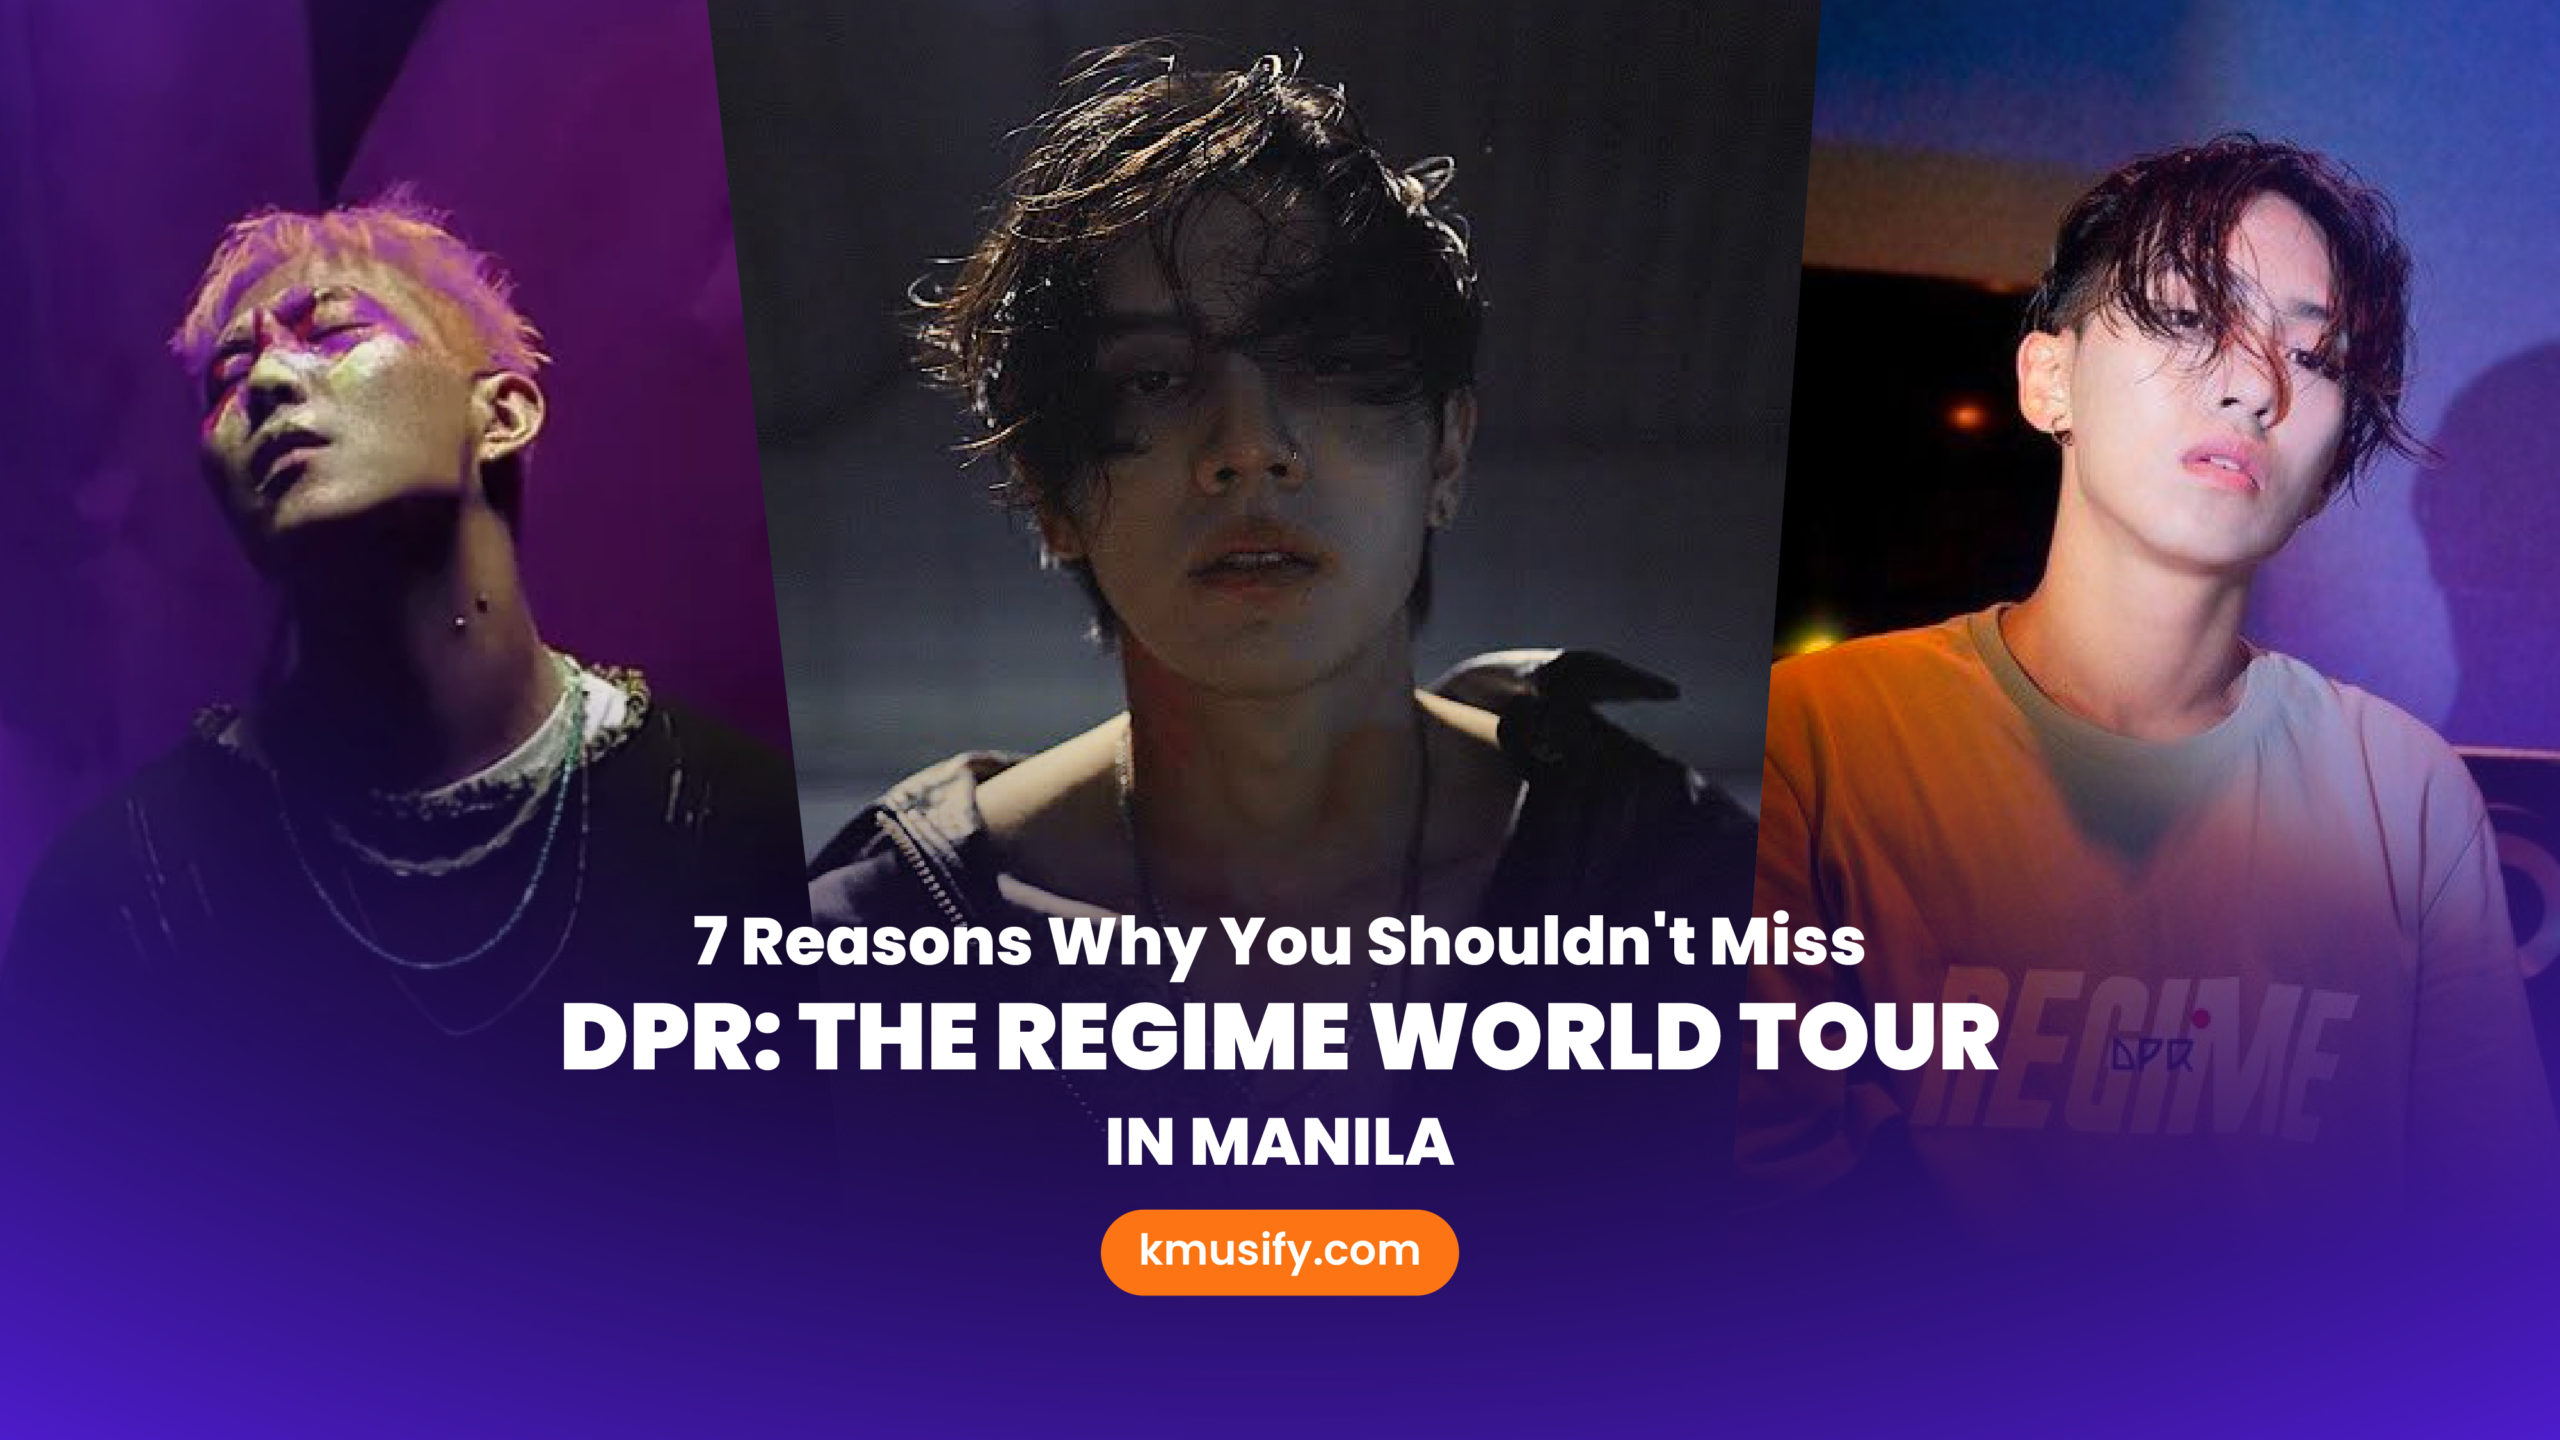 7 Reasons Why You Shouldn’t Miss DPR THE REGIME WORLD TOUR IN MANILA